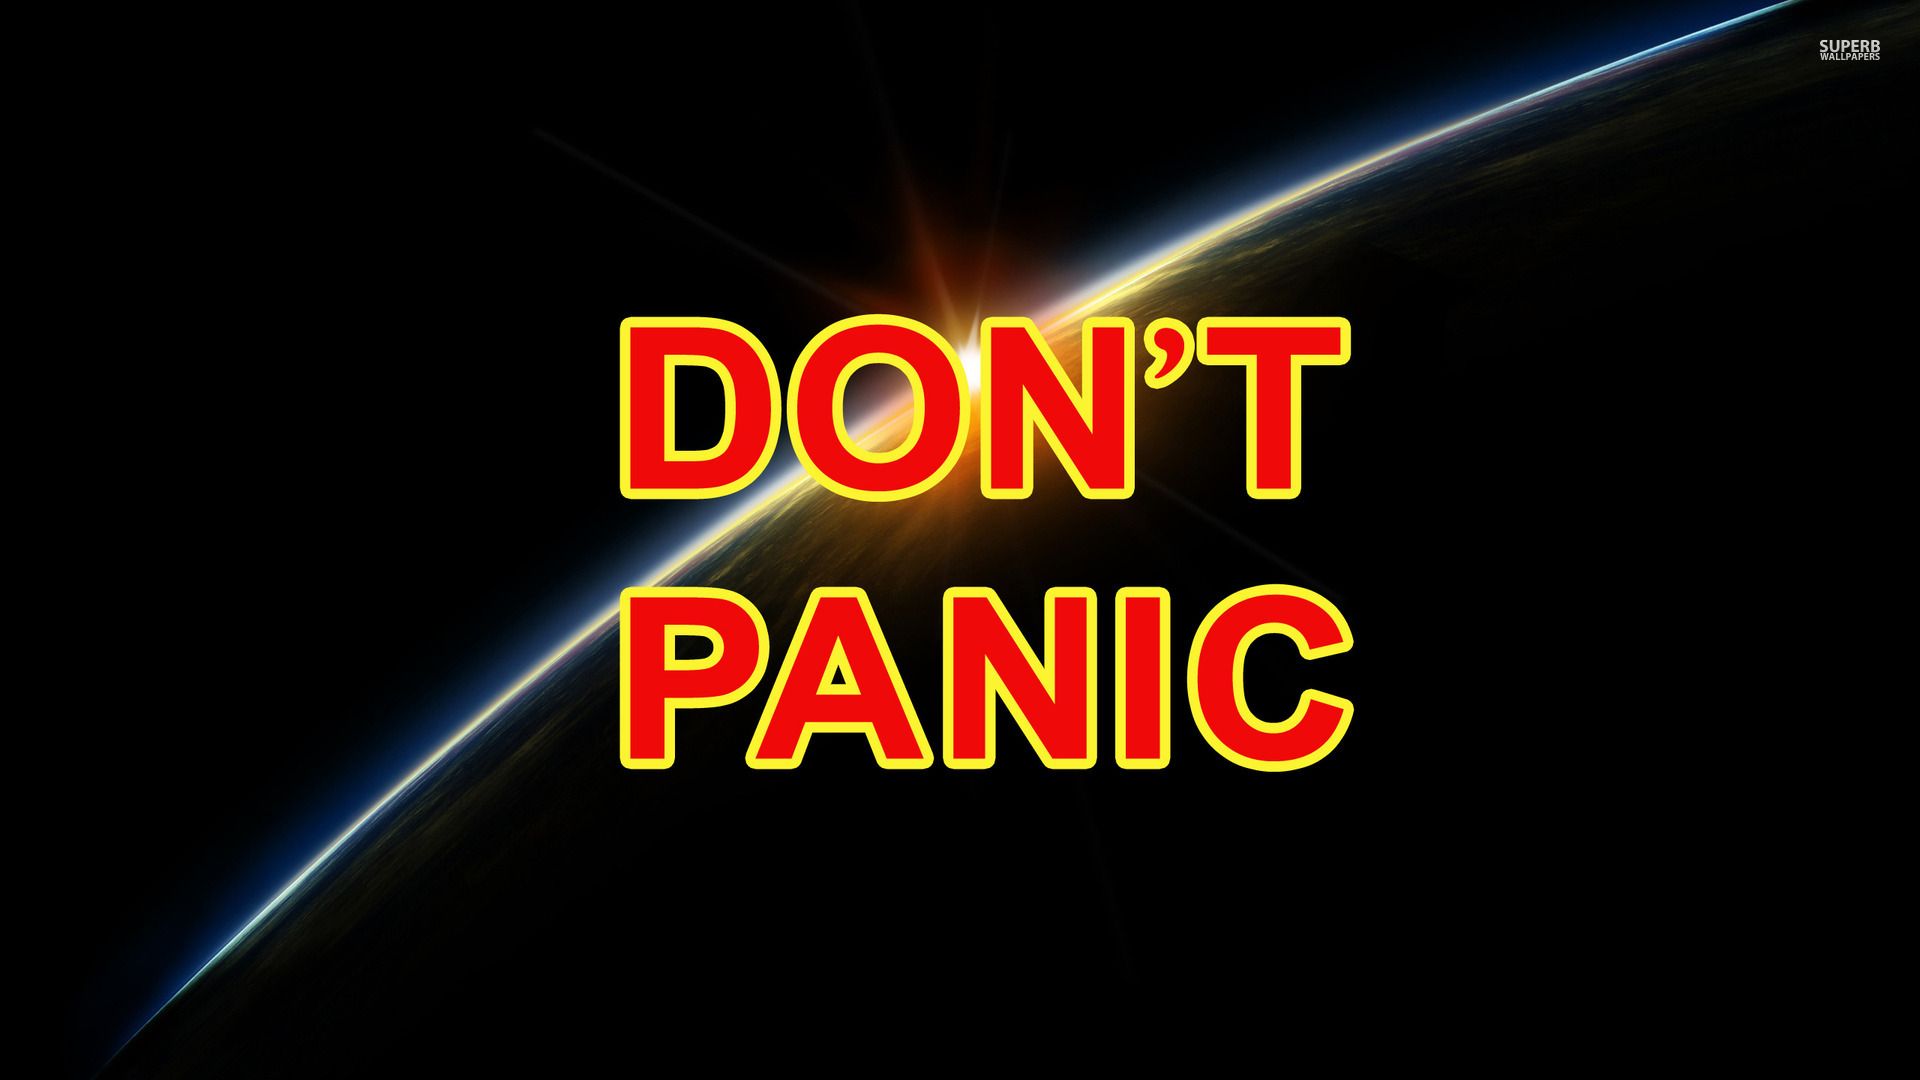 Dont panic wallpaper - Typography wallpapers -